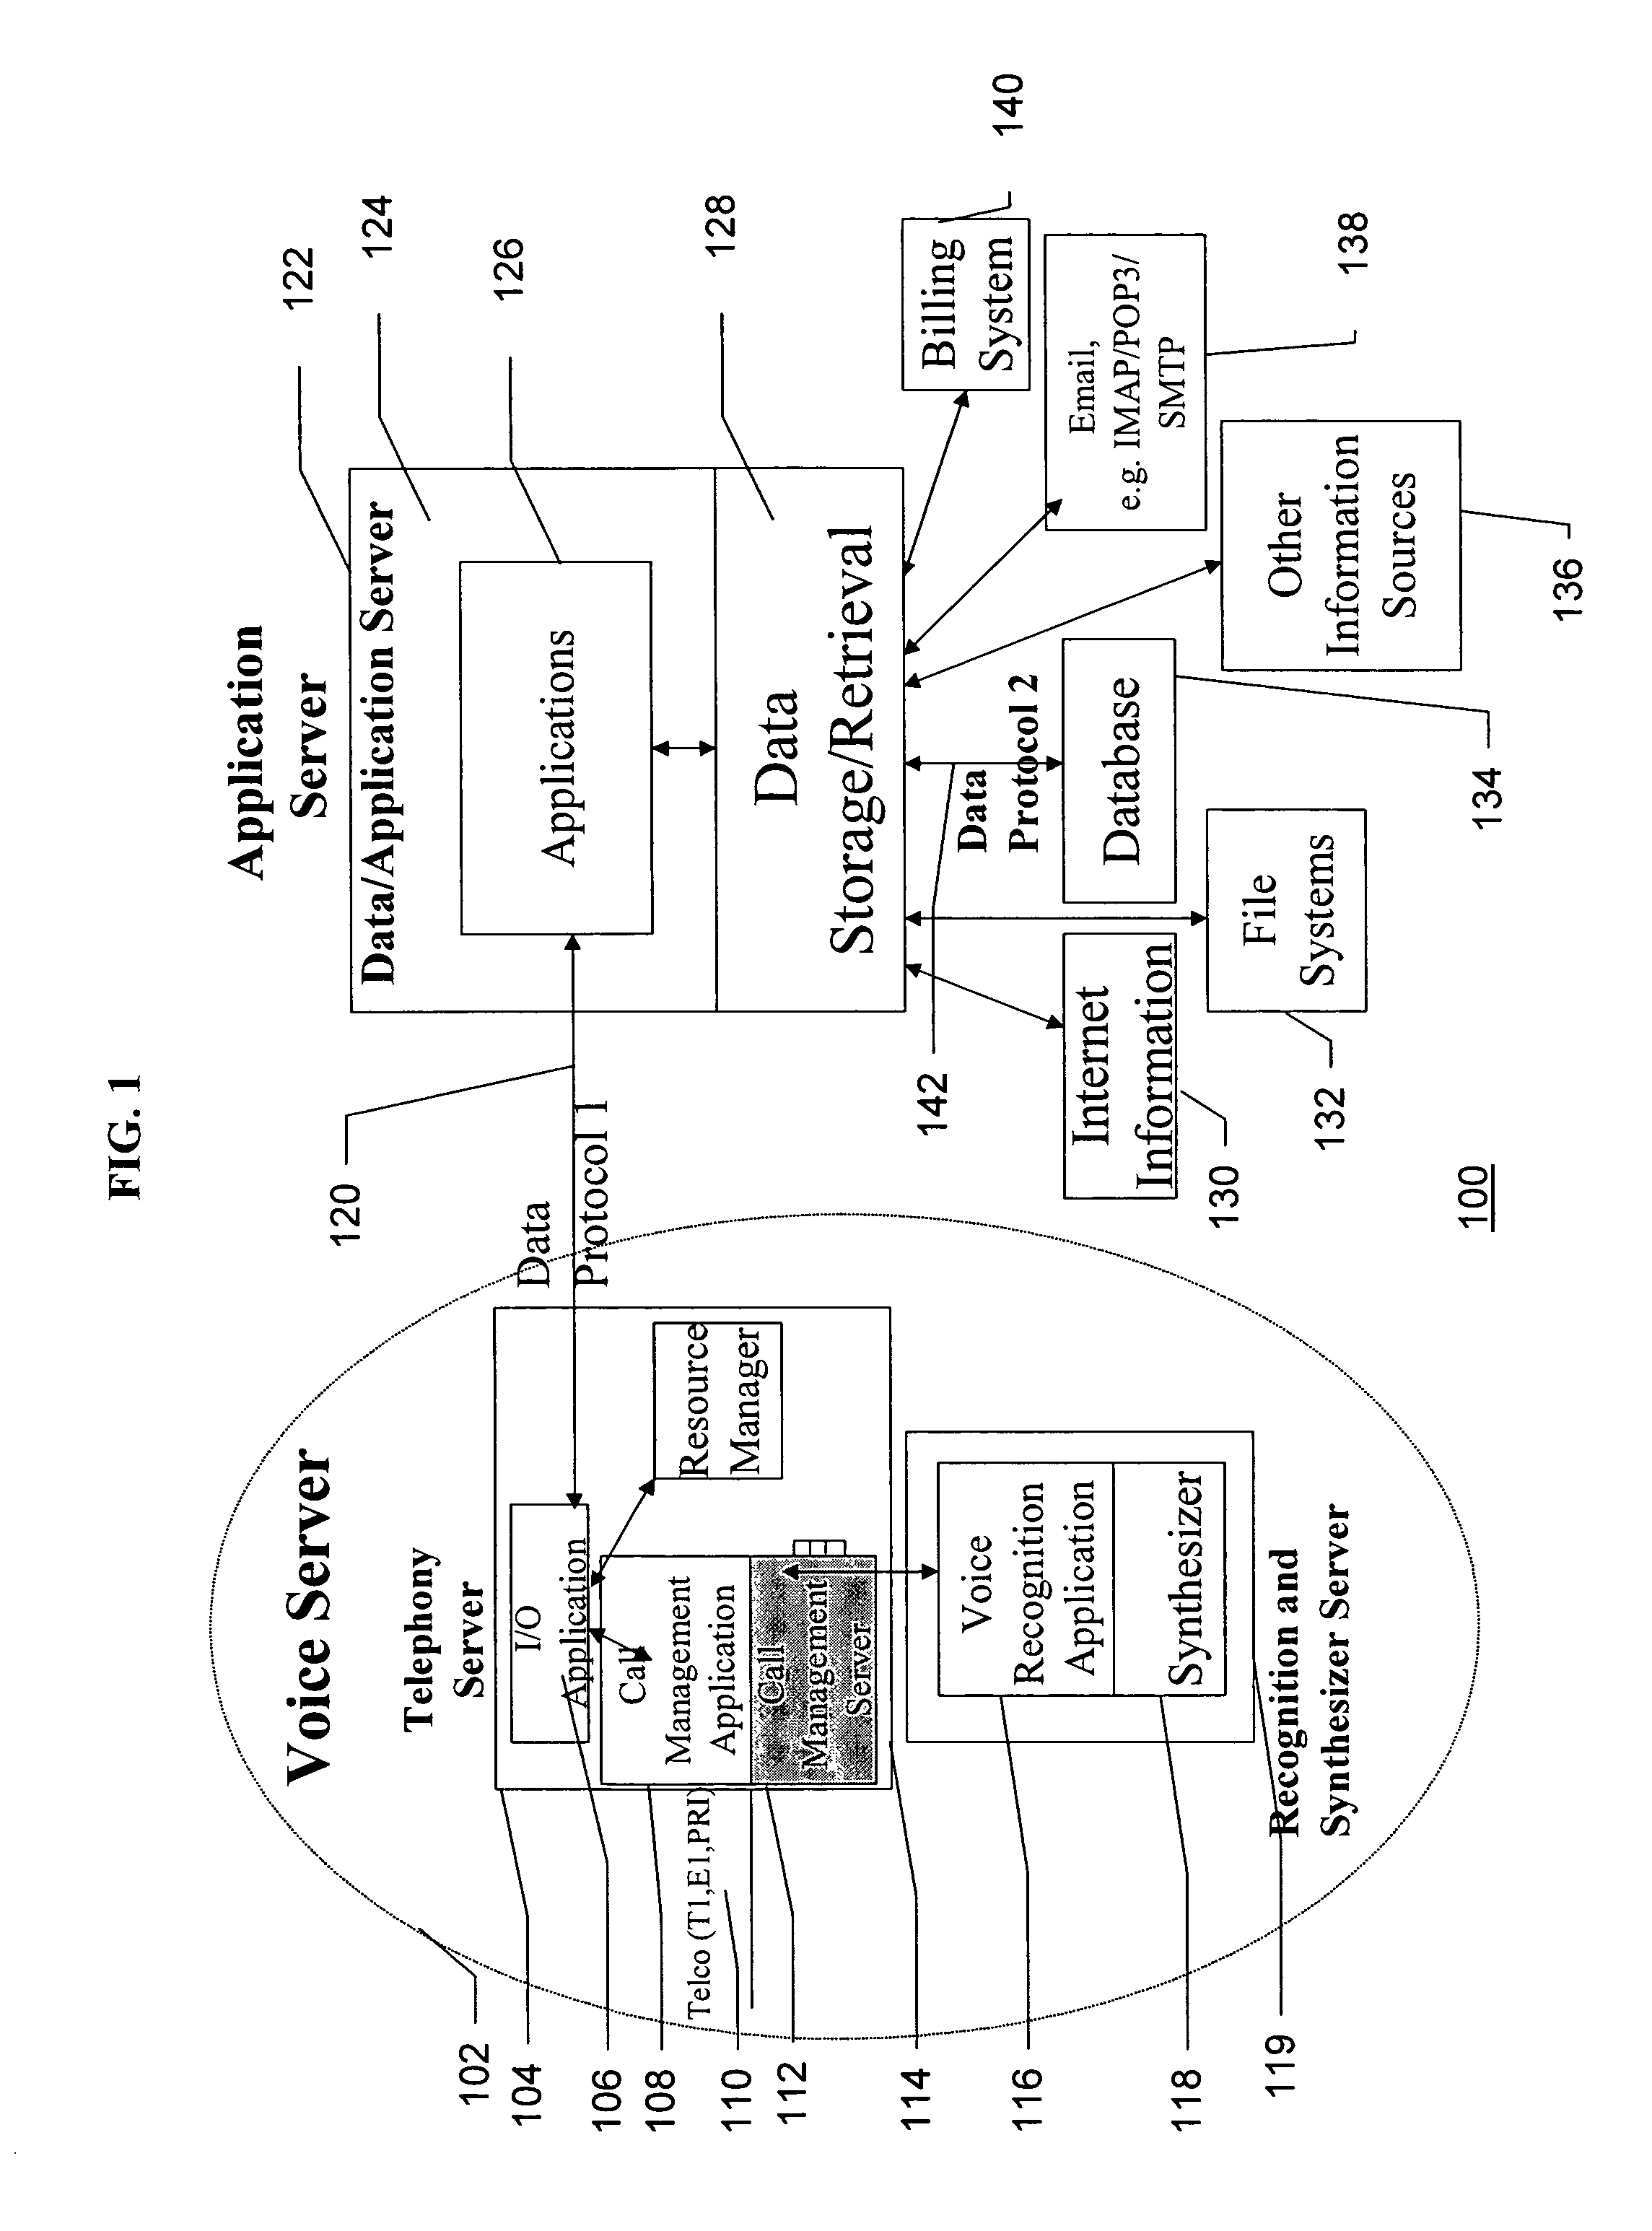 Method for order taking using interactive virtual human agents